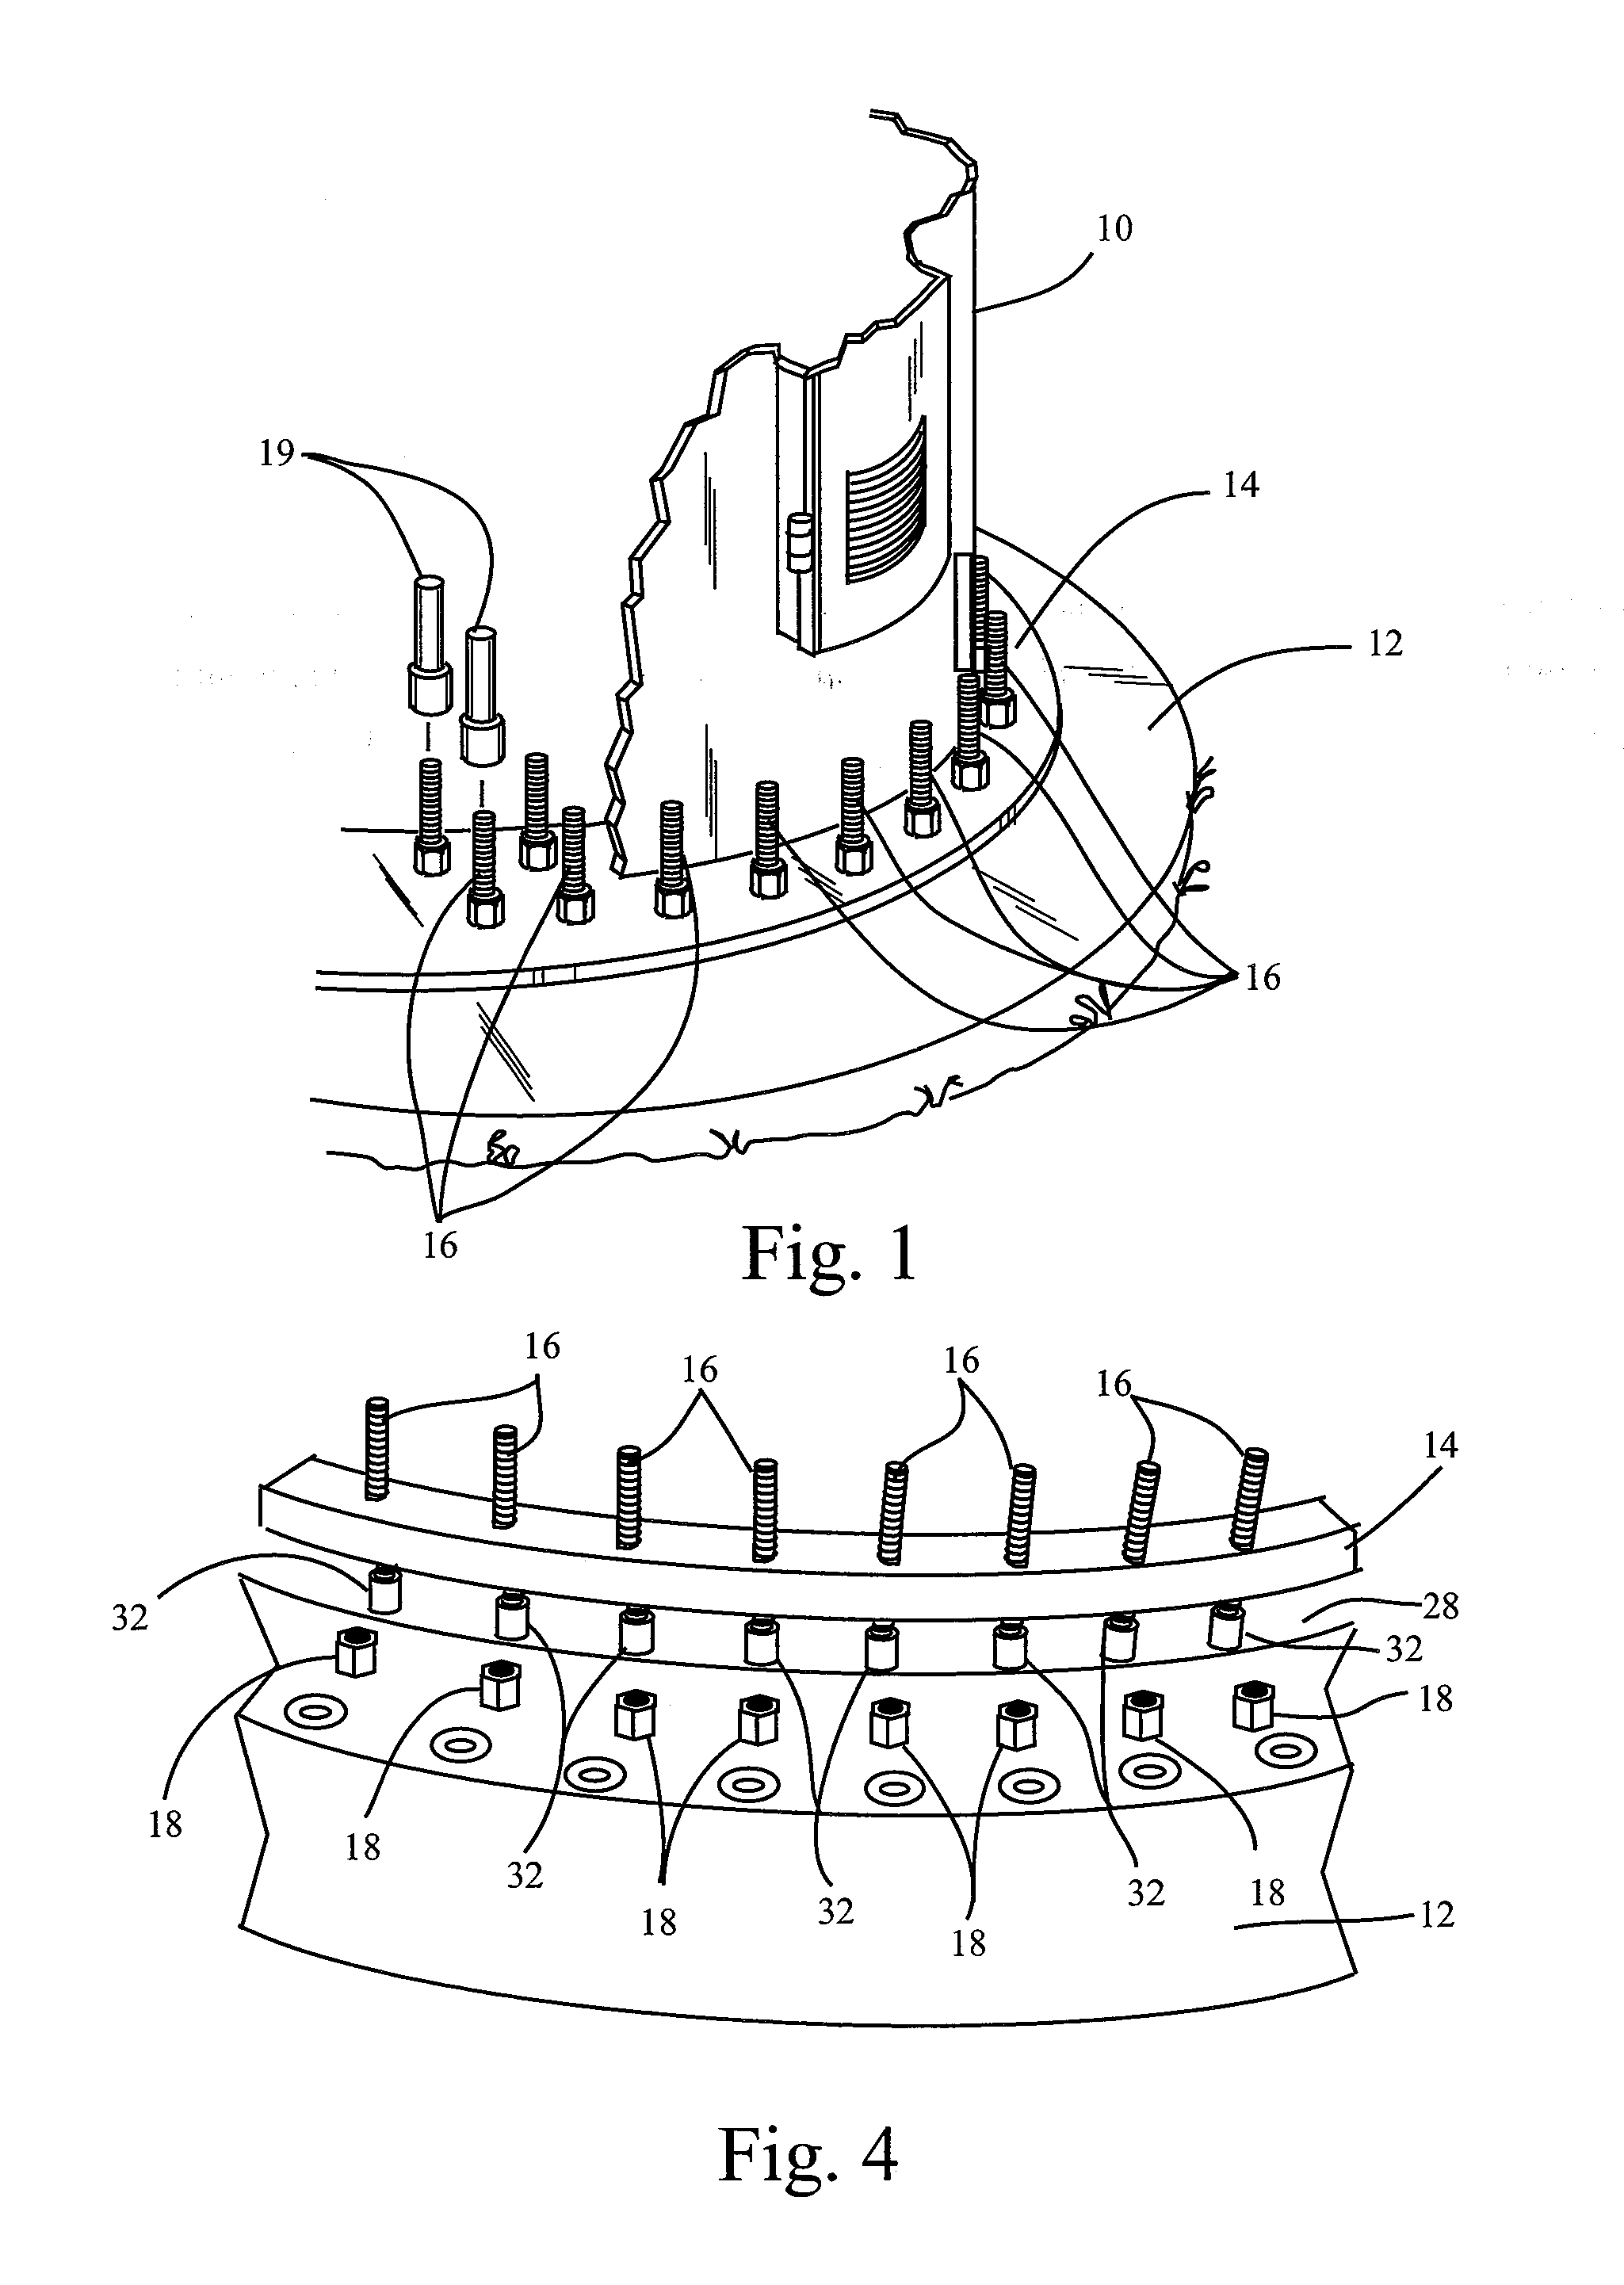 Wind Turbine Installation Comprising an Apparatus for Protection of Anchor Bolts and Method of Installation.